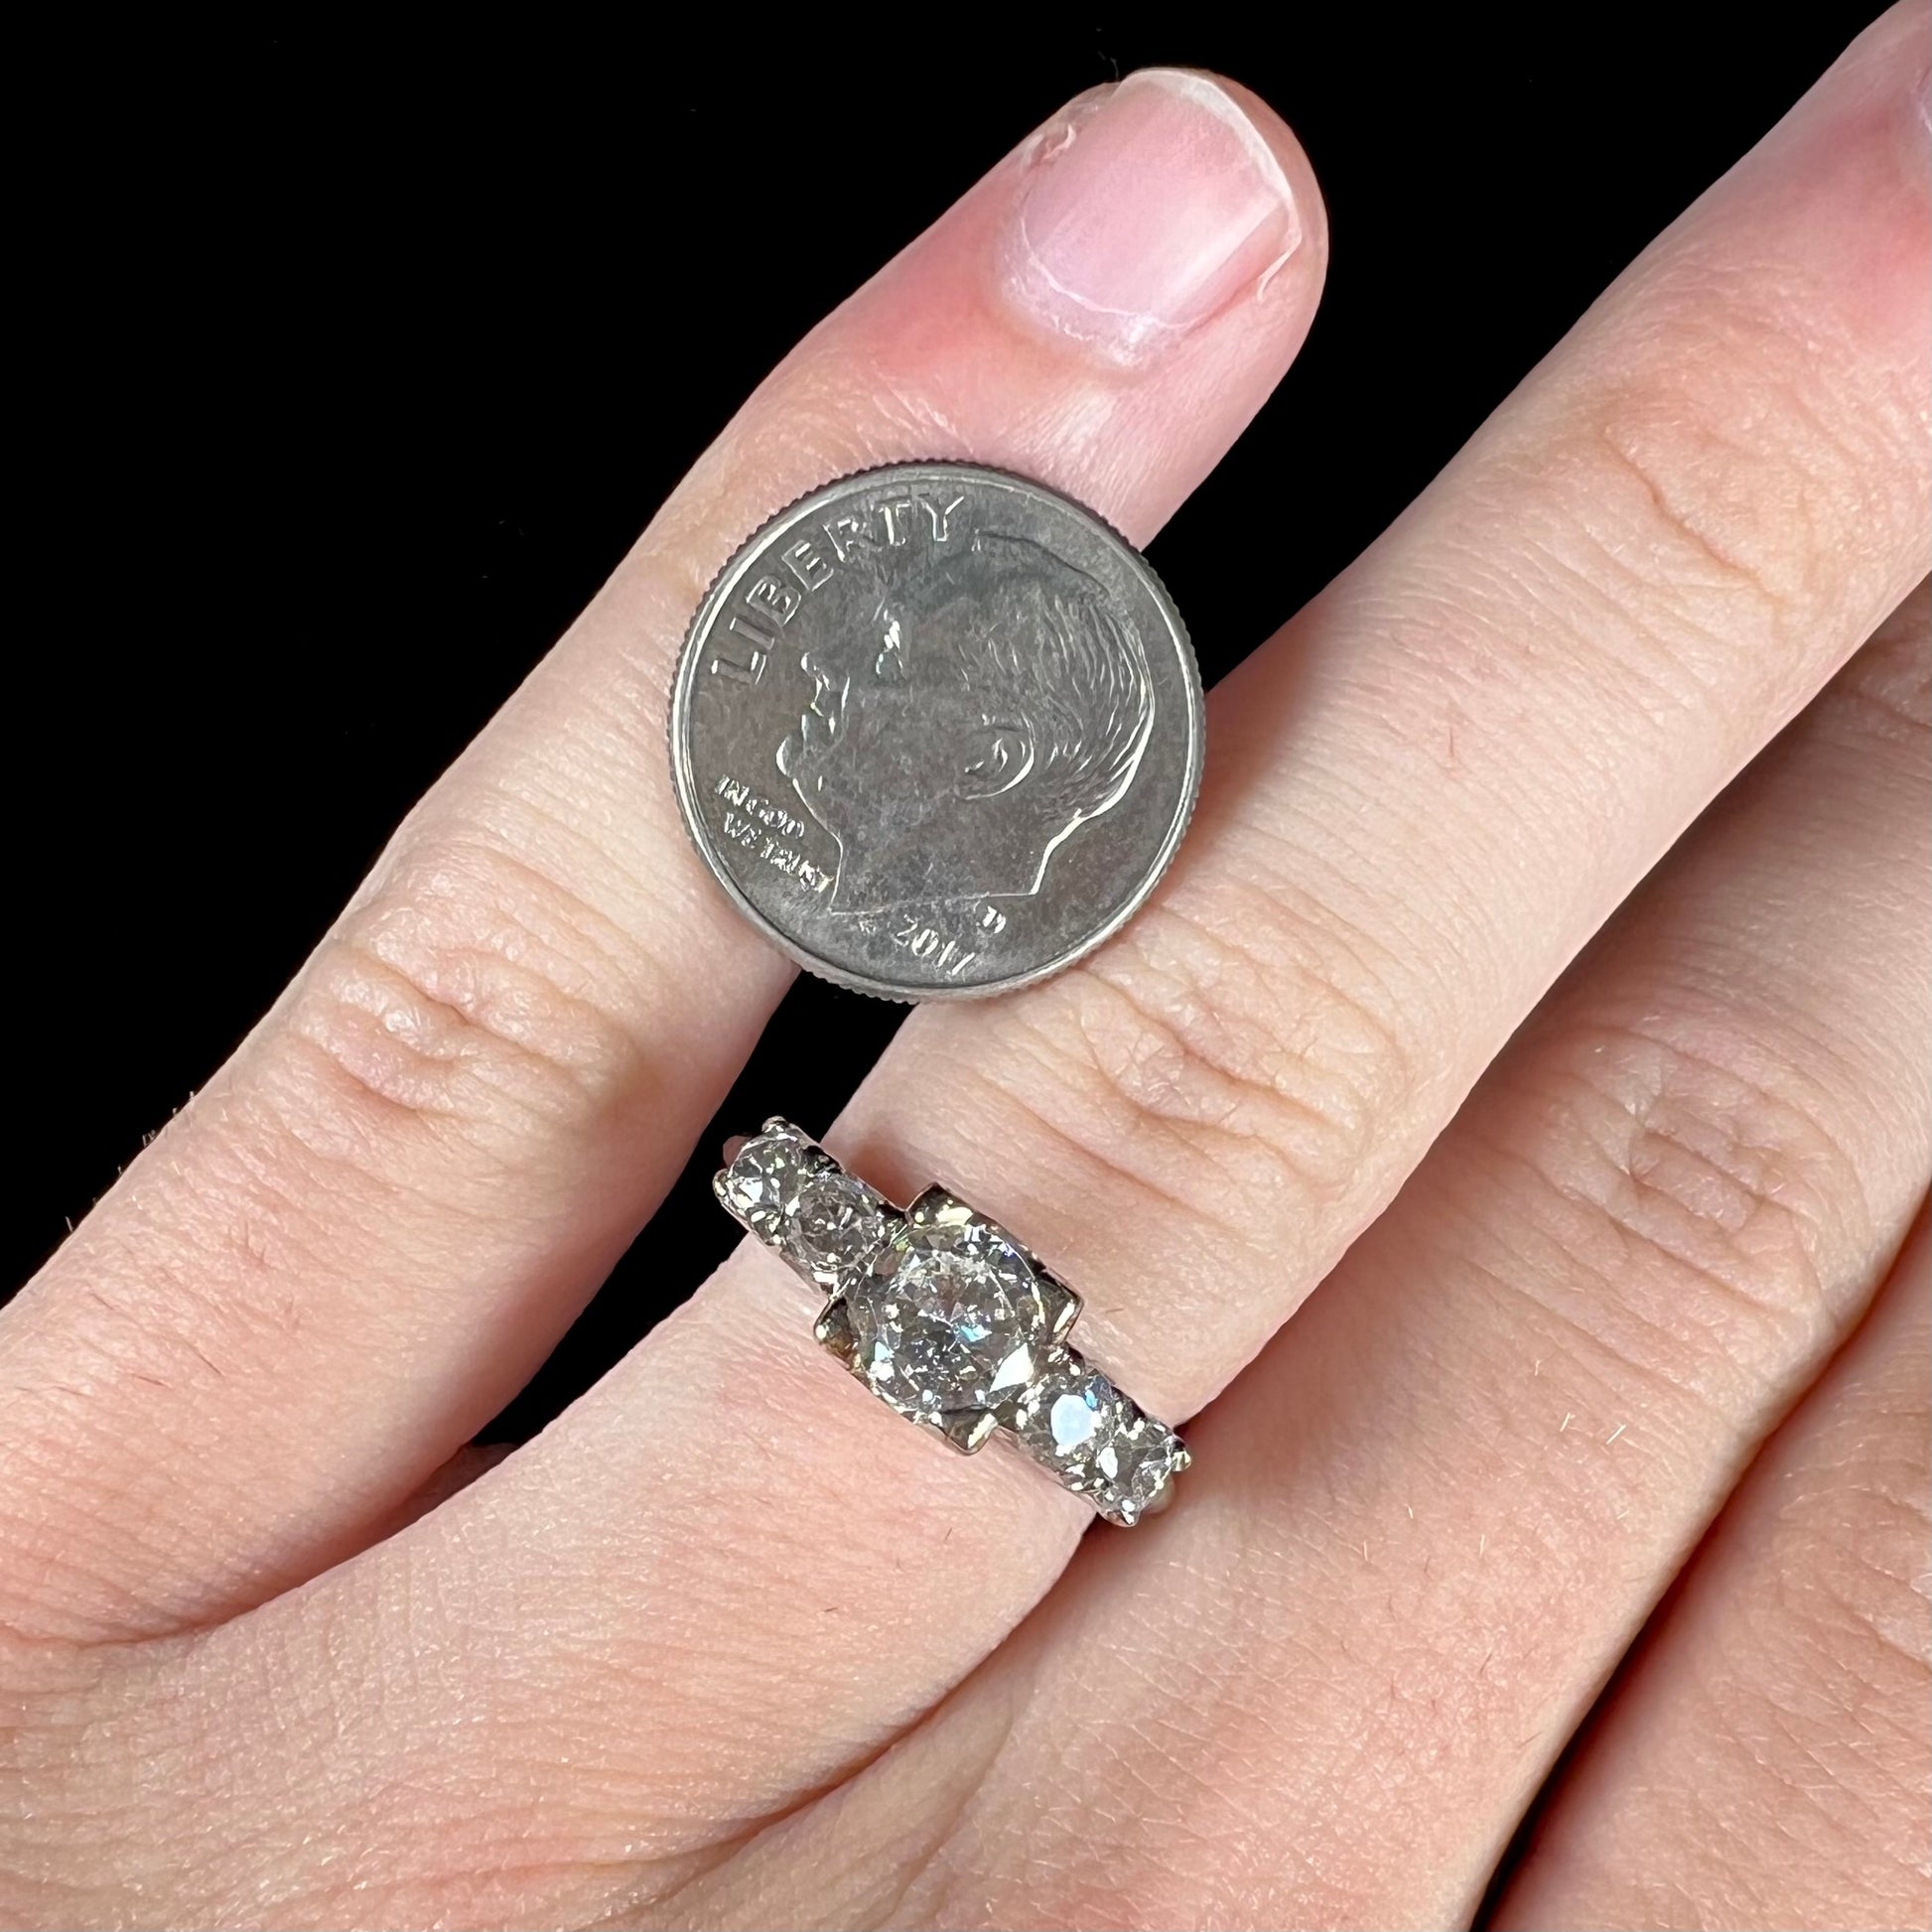 A ladies' 1800's antique white gold diamond ring.  The center stone is an Early American Cut diamond, and the accent stones are Old Mine Cut diamonds.